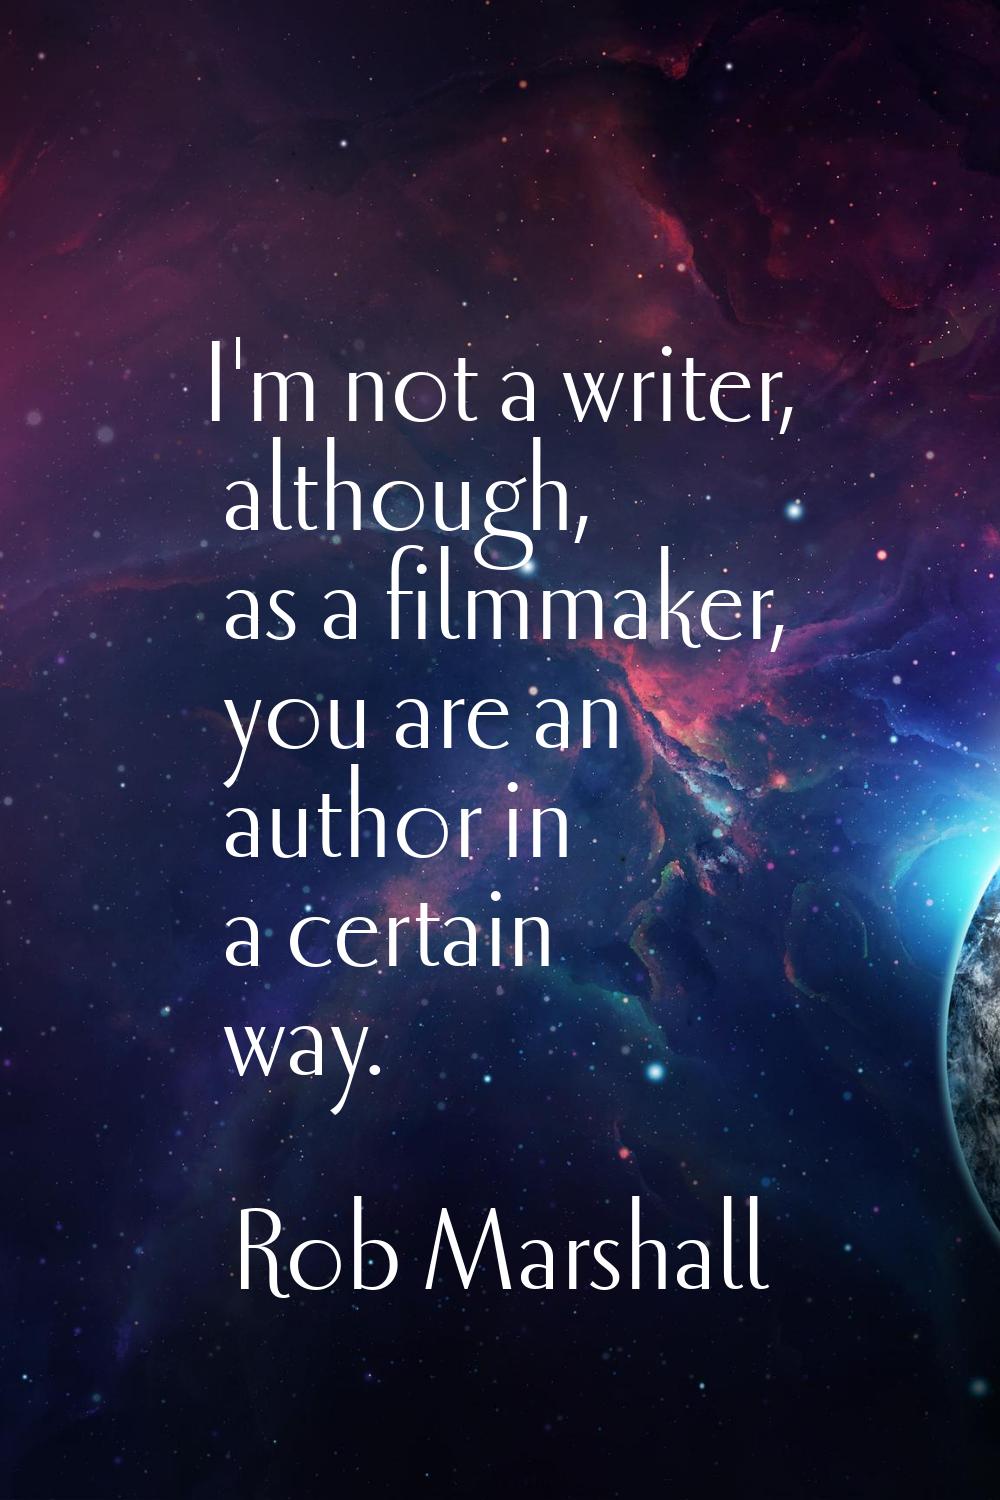 I'm not a writer, although, as a filmmaker, you are an author in a certain way.